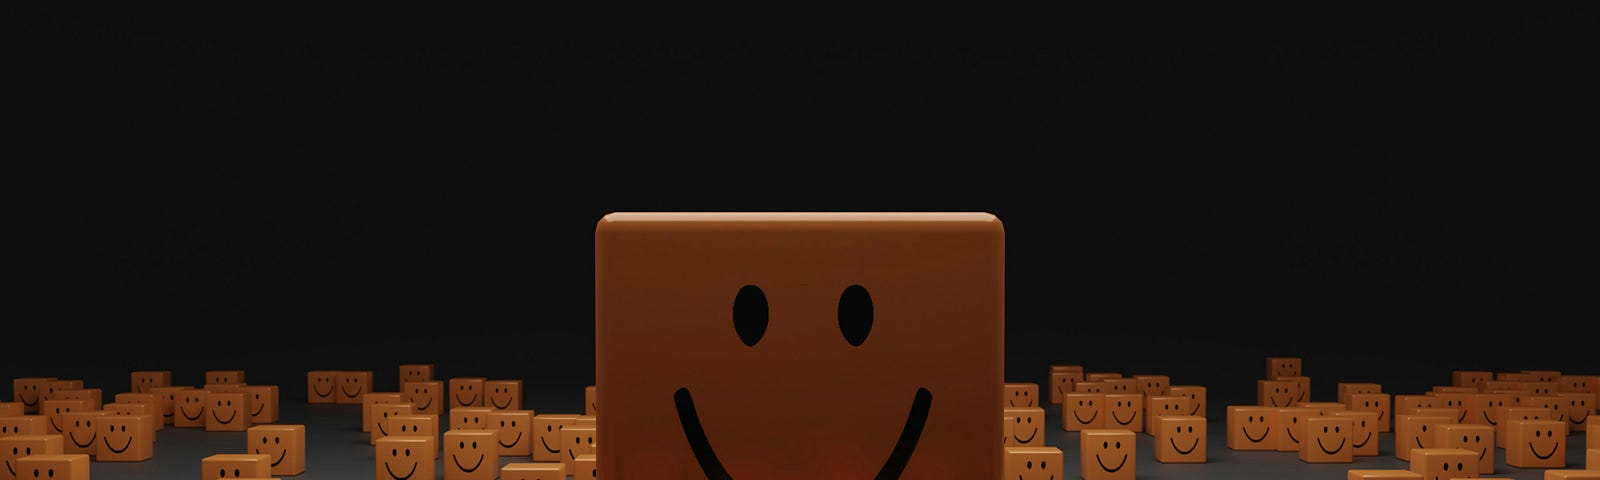 Many small cubes with smiley faces surrounding one large cube with a smiley face.